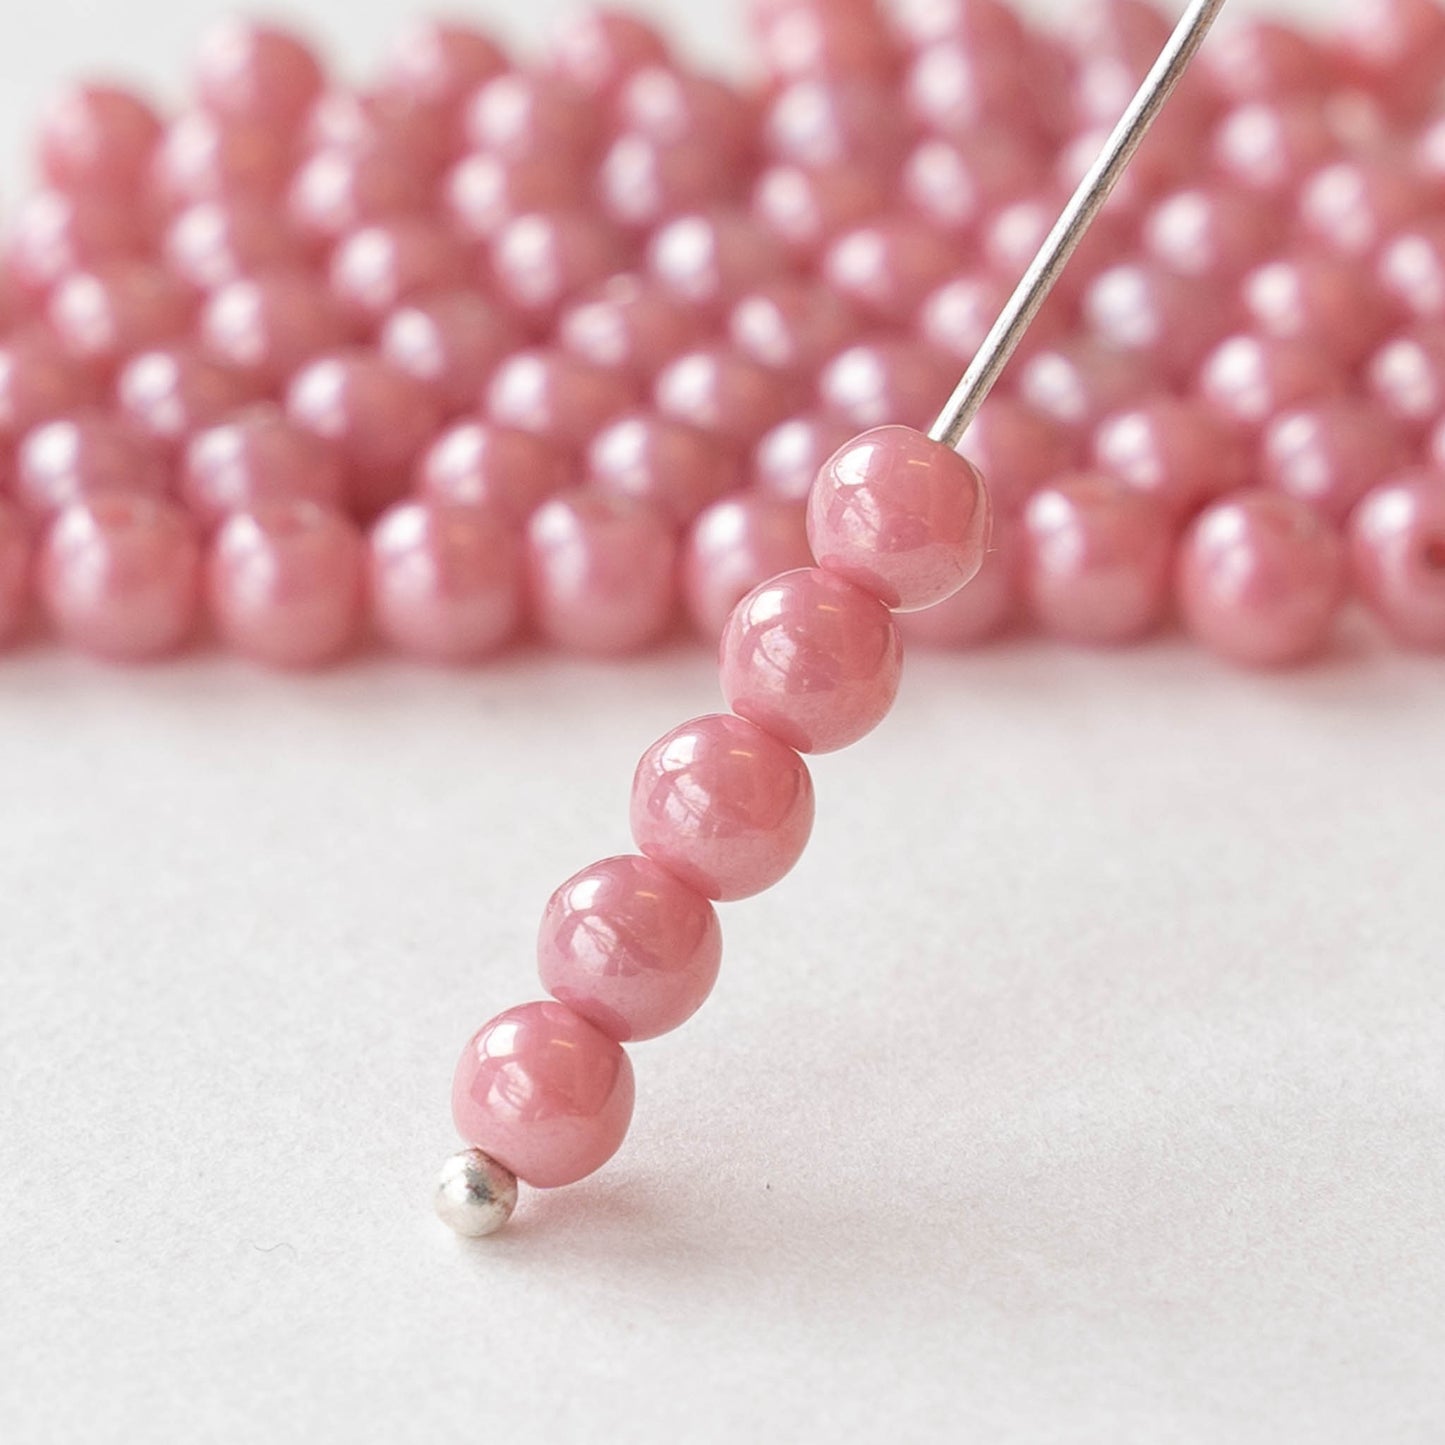 4mm Round Glass Beads - Pink Luster - 100 Beads